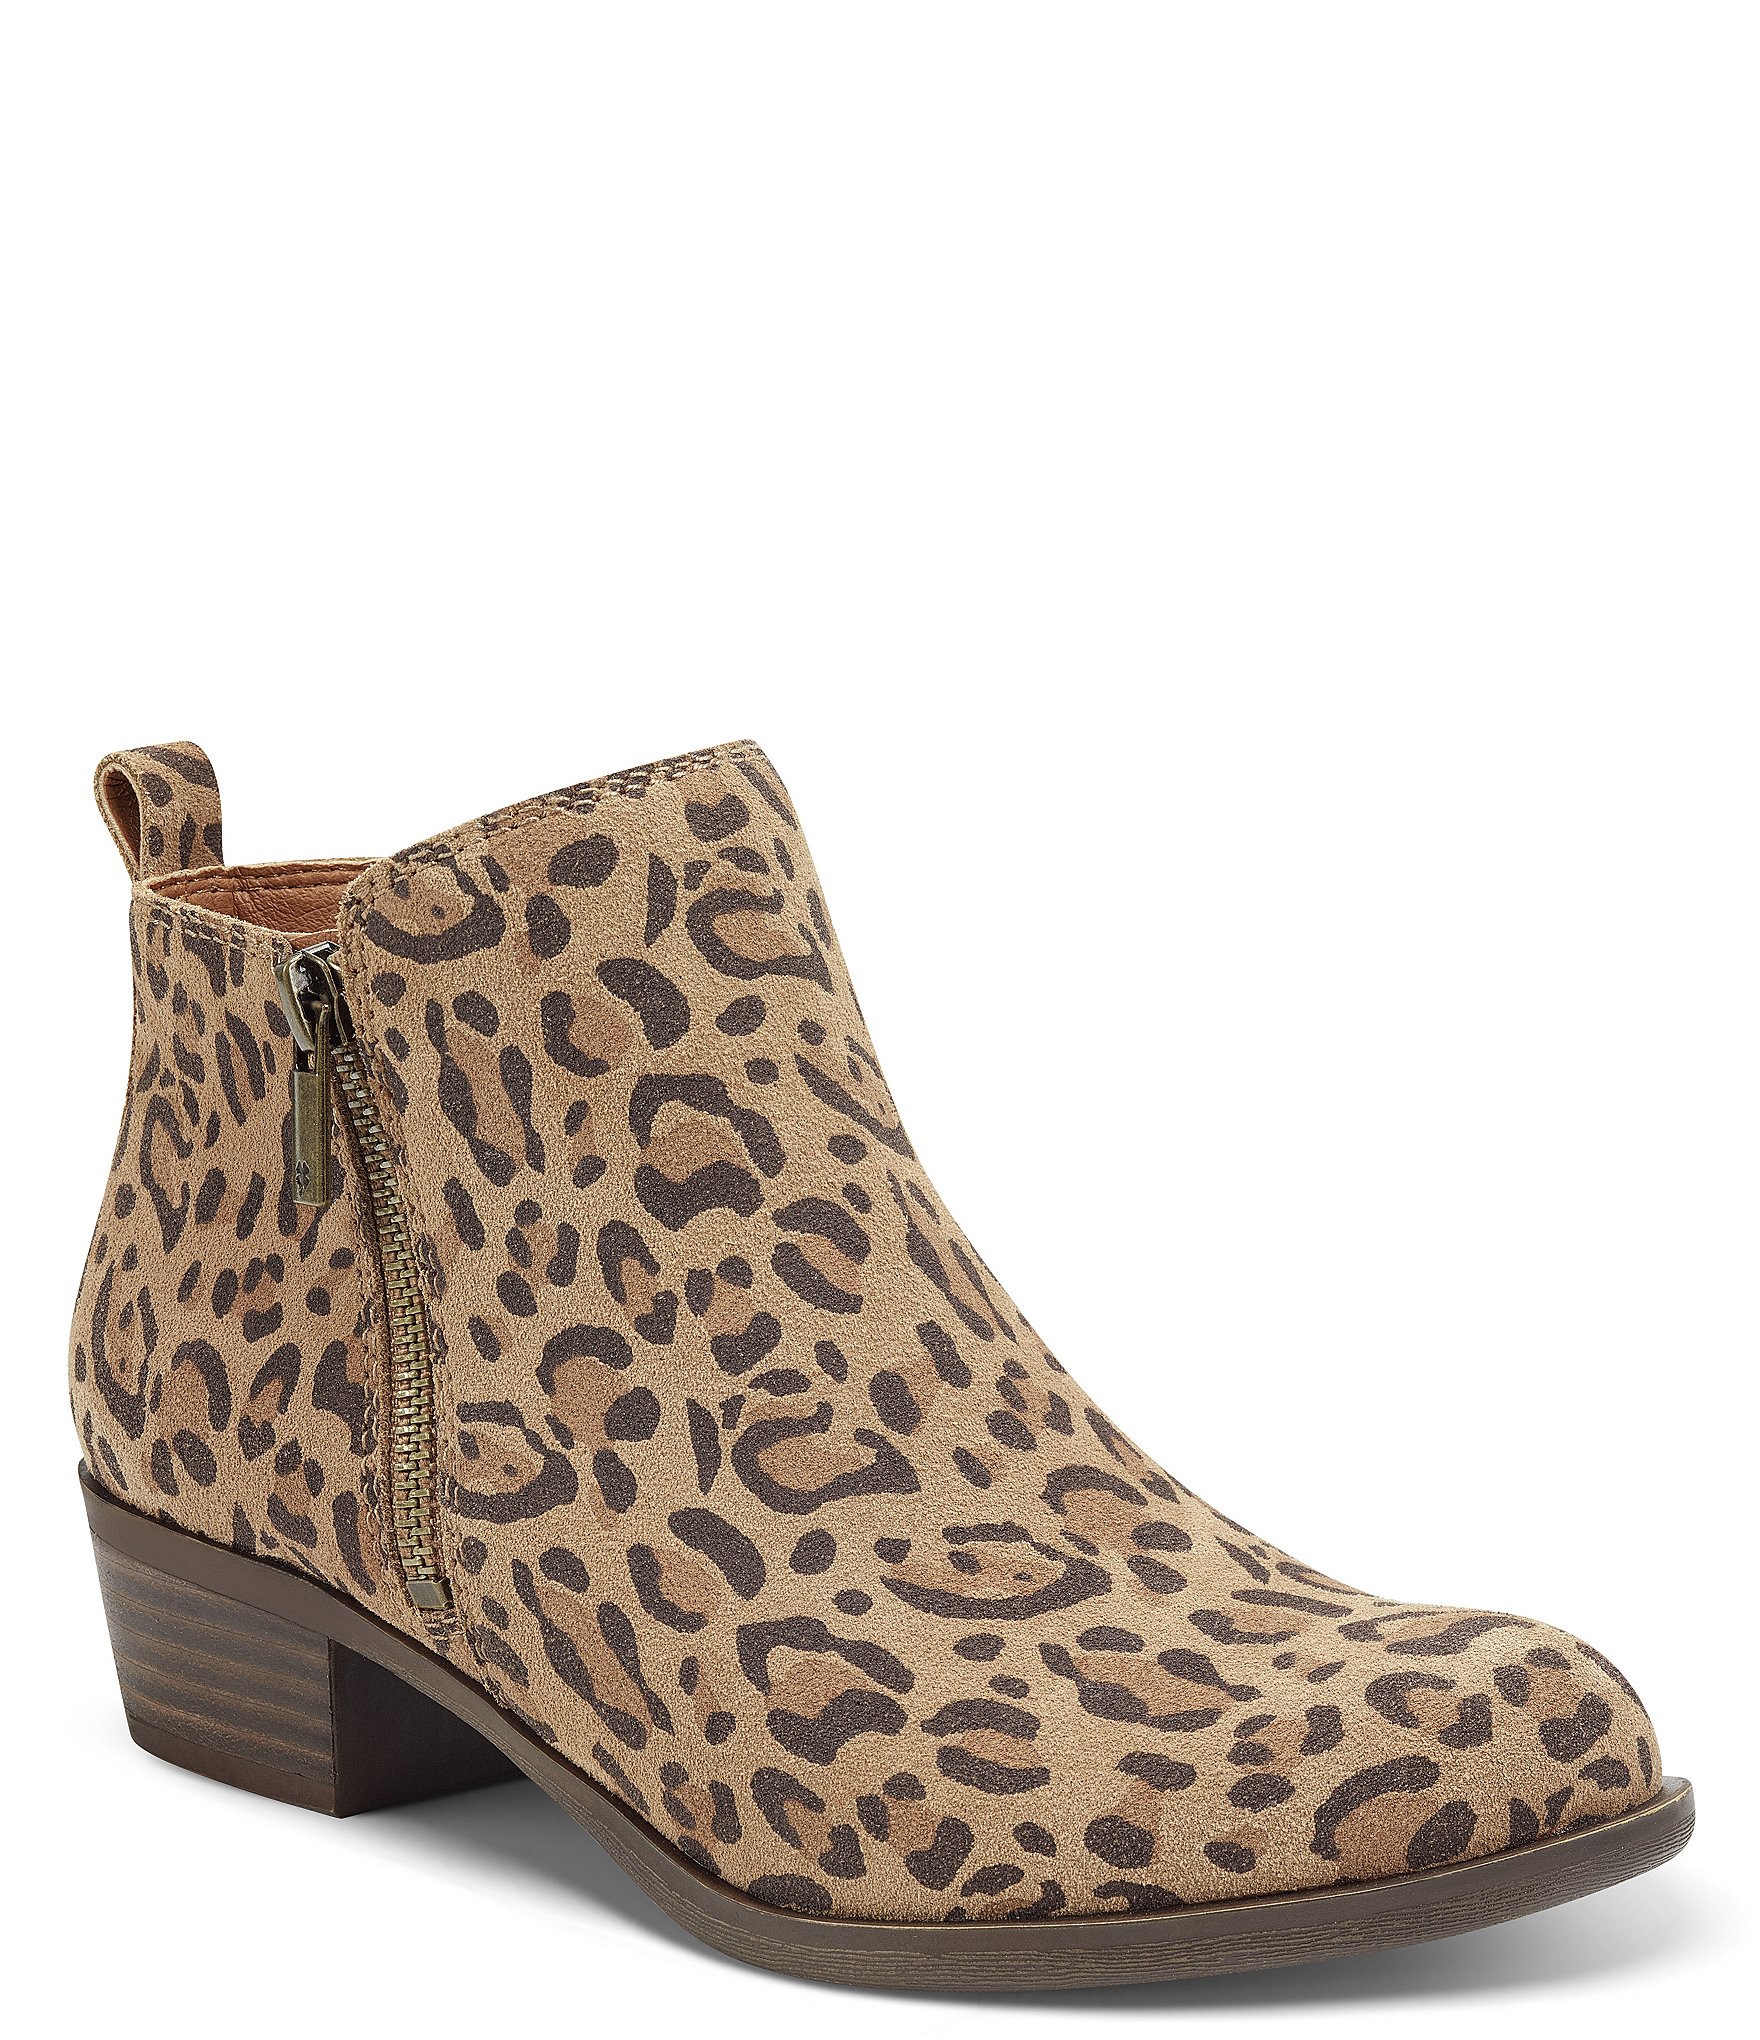 LUCKY BRAND Taheeti leopard print suede lace-up oxford wedge booties